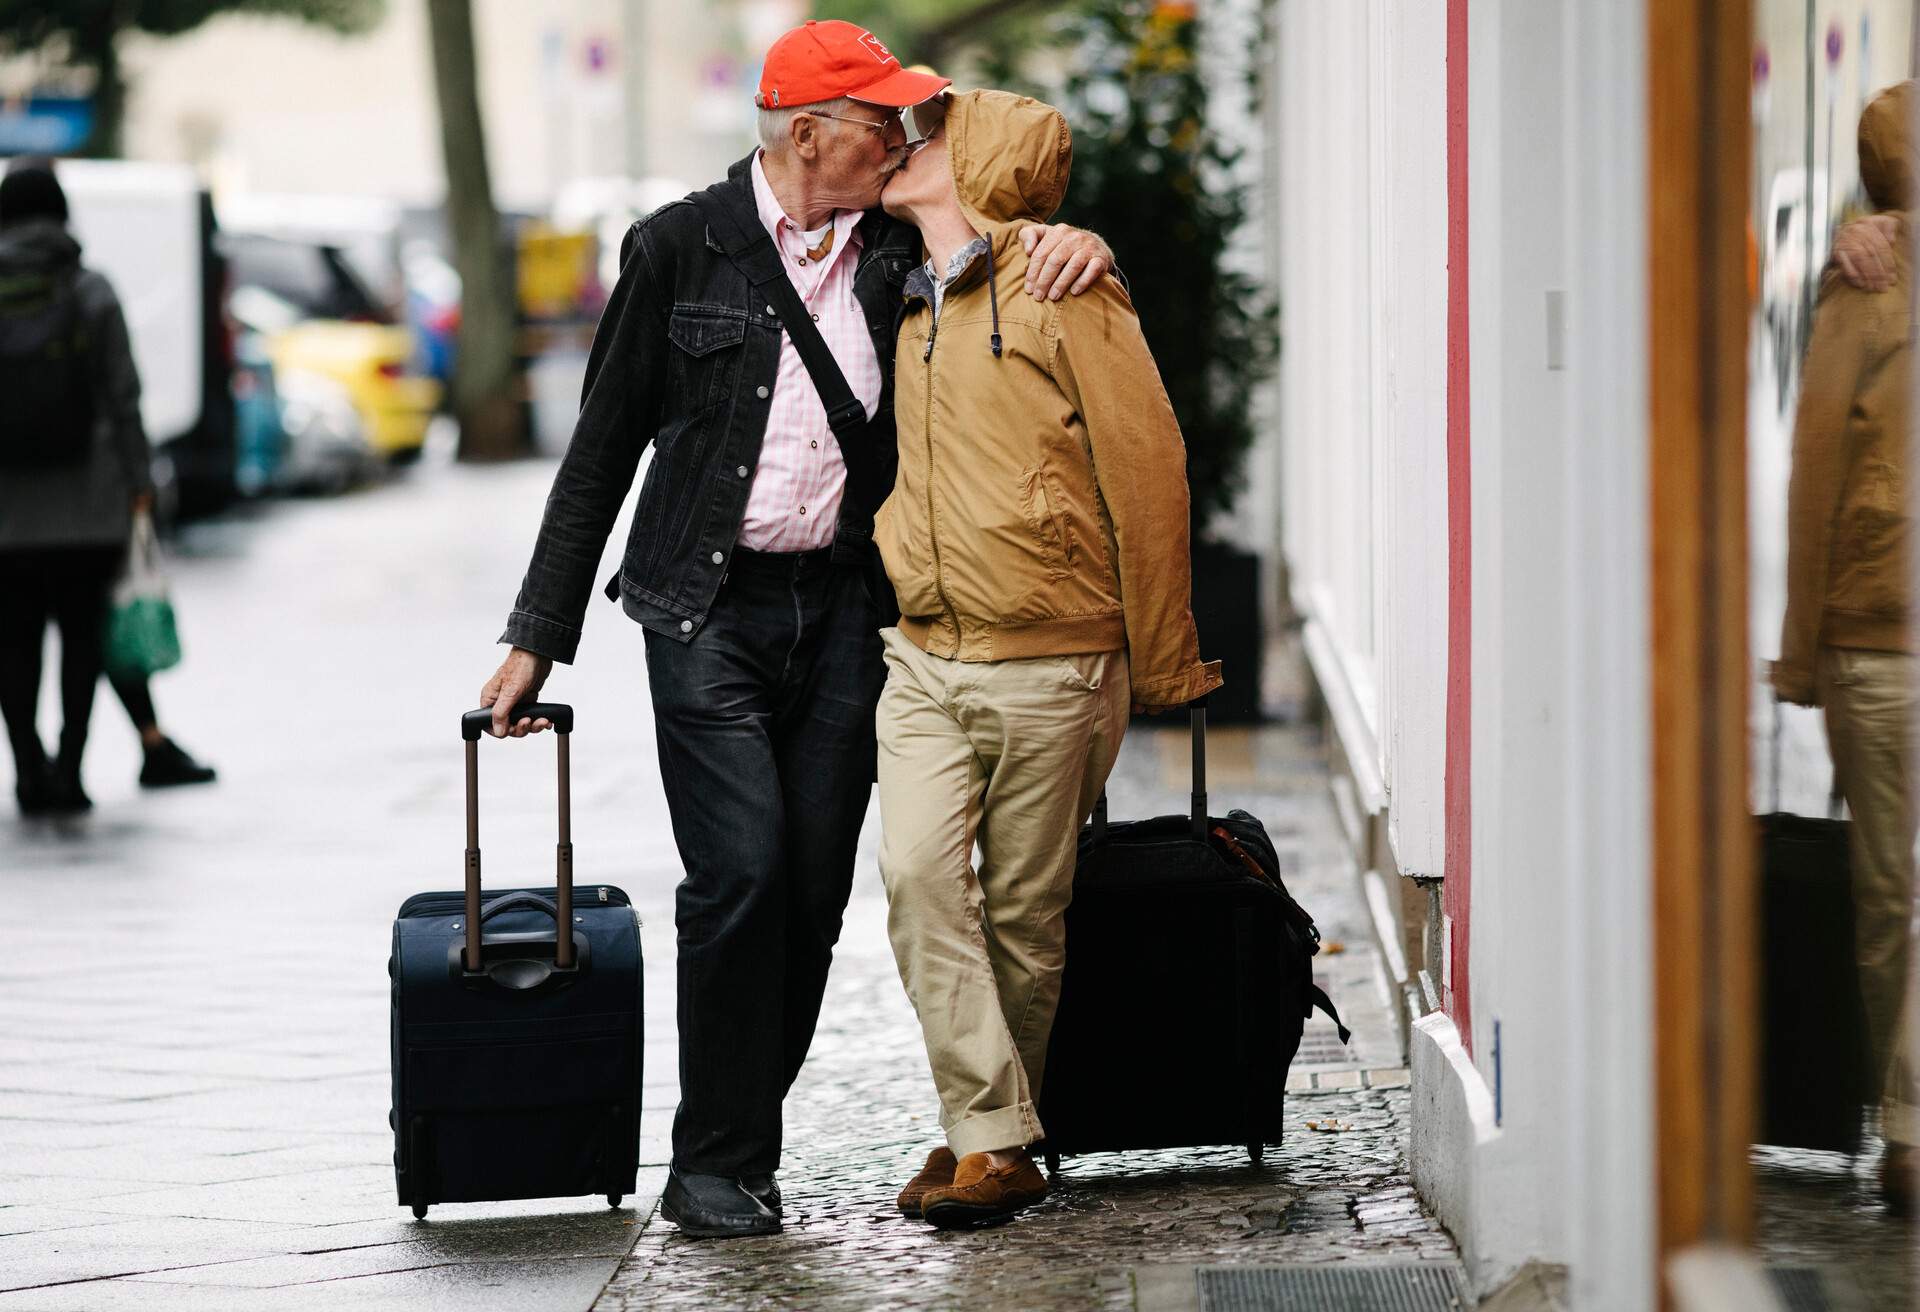 A mature gay couple kissing in the street while walking with their luggage on the way to a hotel together.